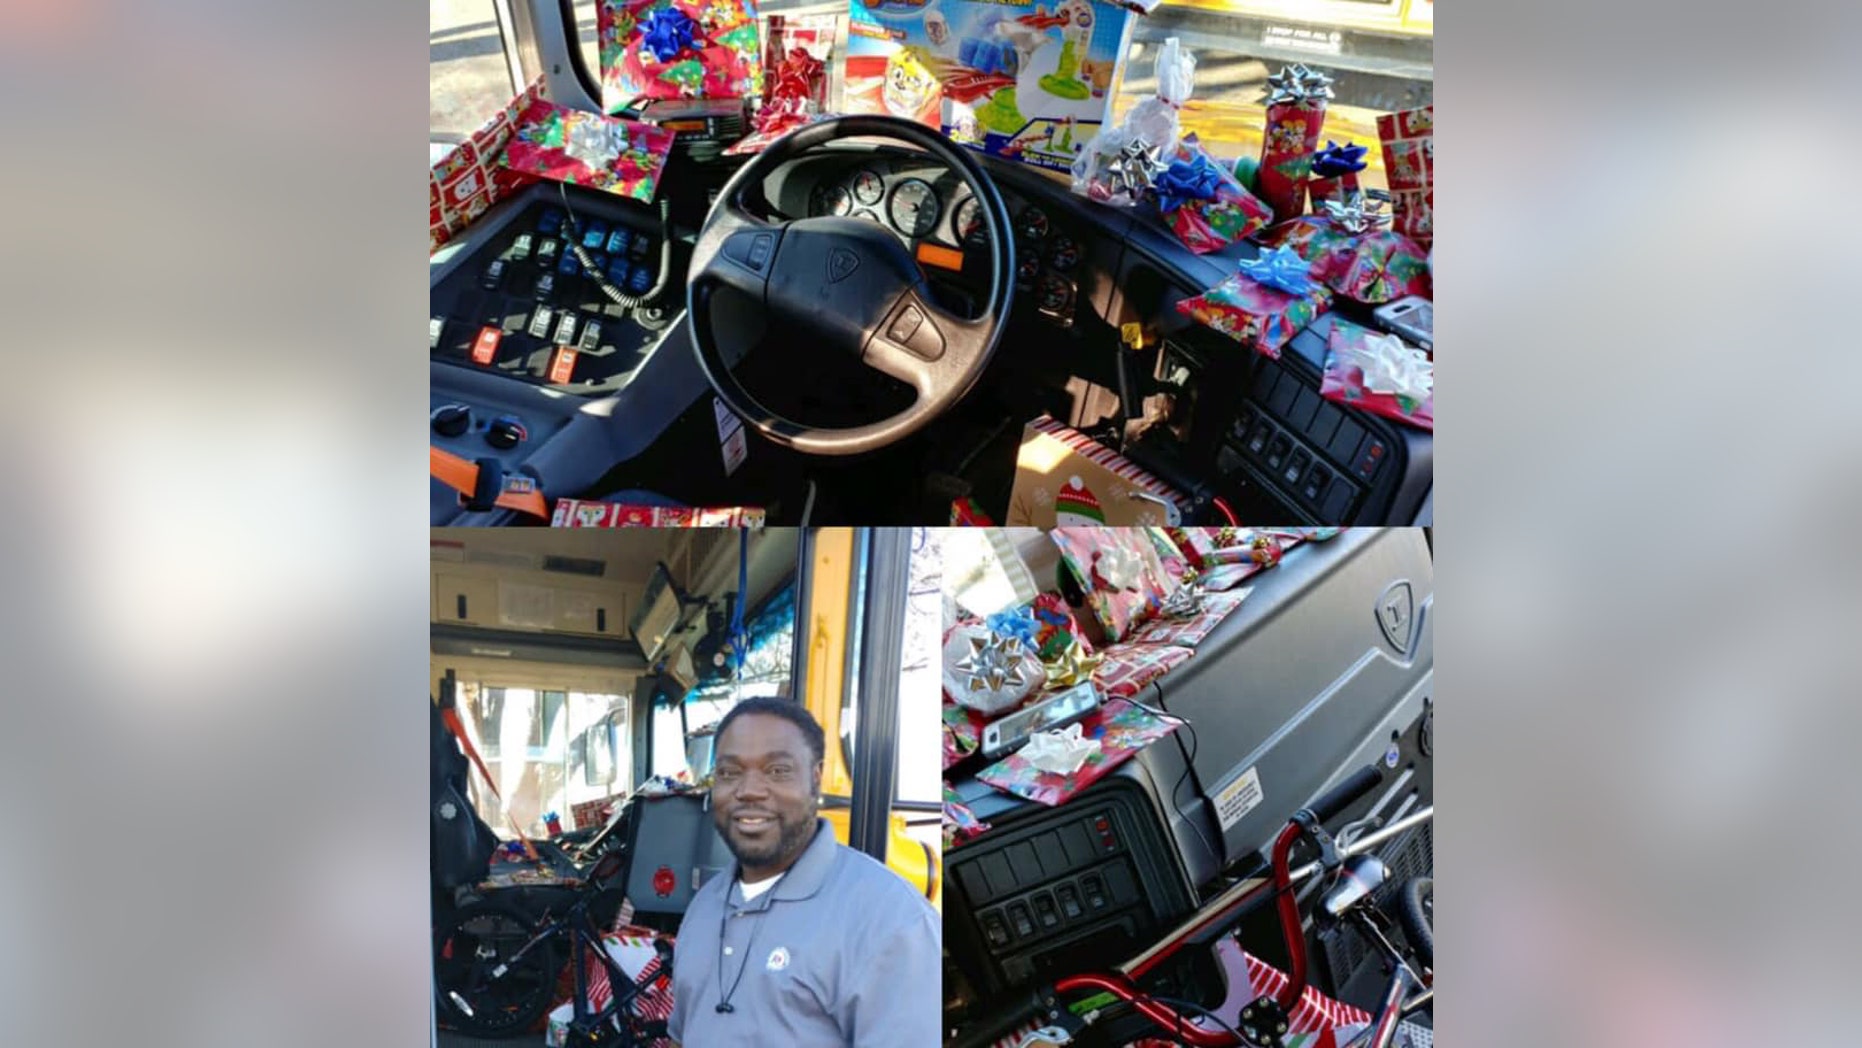 Texas school bus driver gifts holiday presents to kids on his bus: report